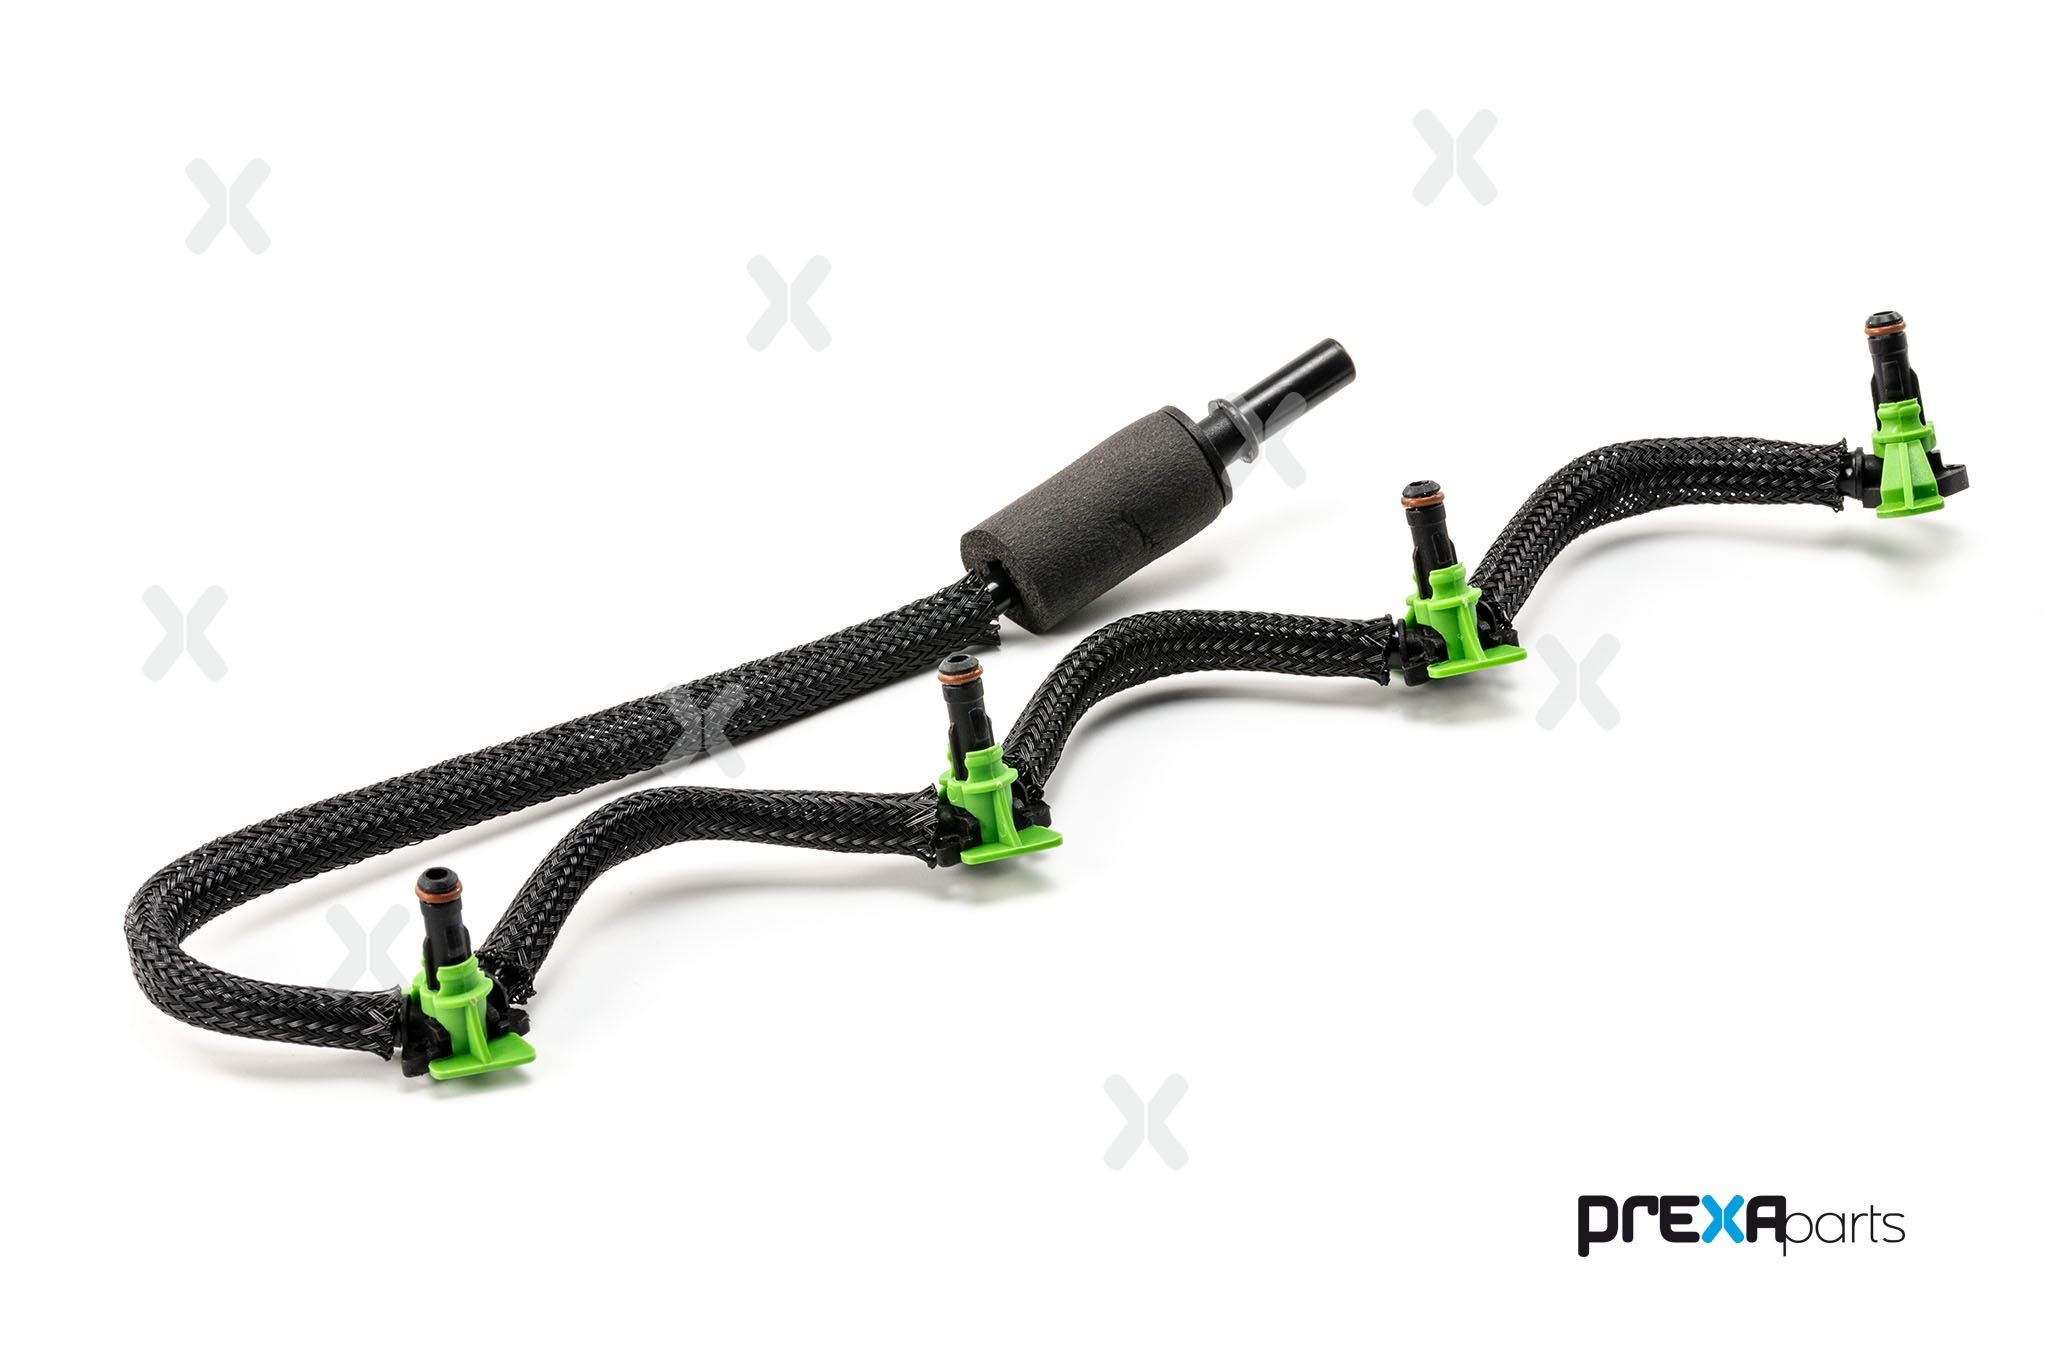 Original P150376 PREXAparts Hose, fuel overflow experience and price